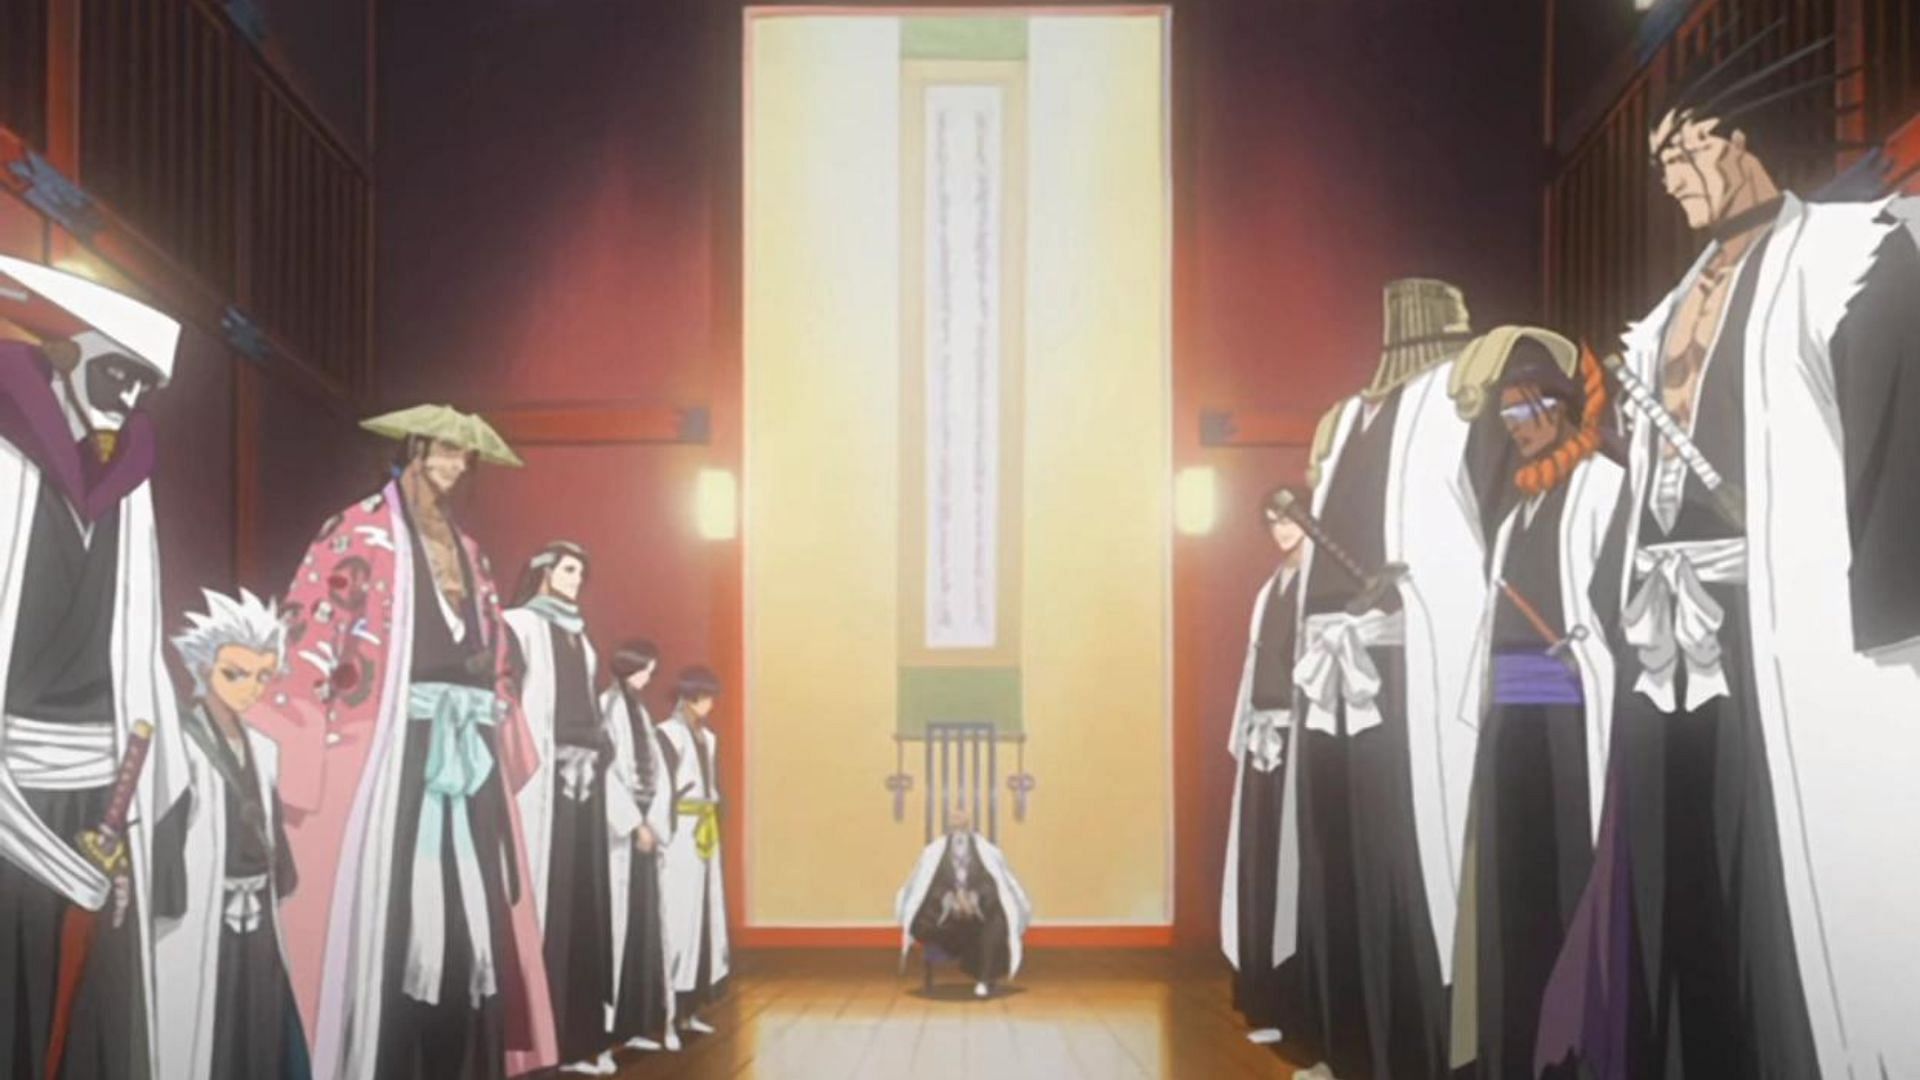 The first appearance of the Gotei 13 captains in Bleach: Thousand-Year Blood War (Image via Studio Pierrot)